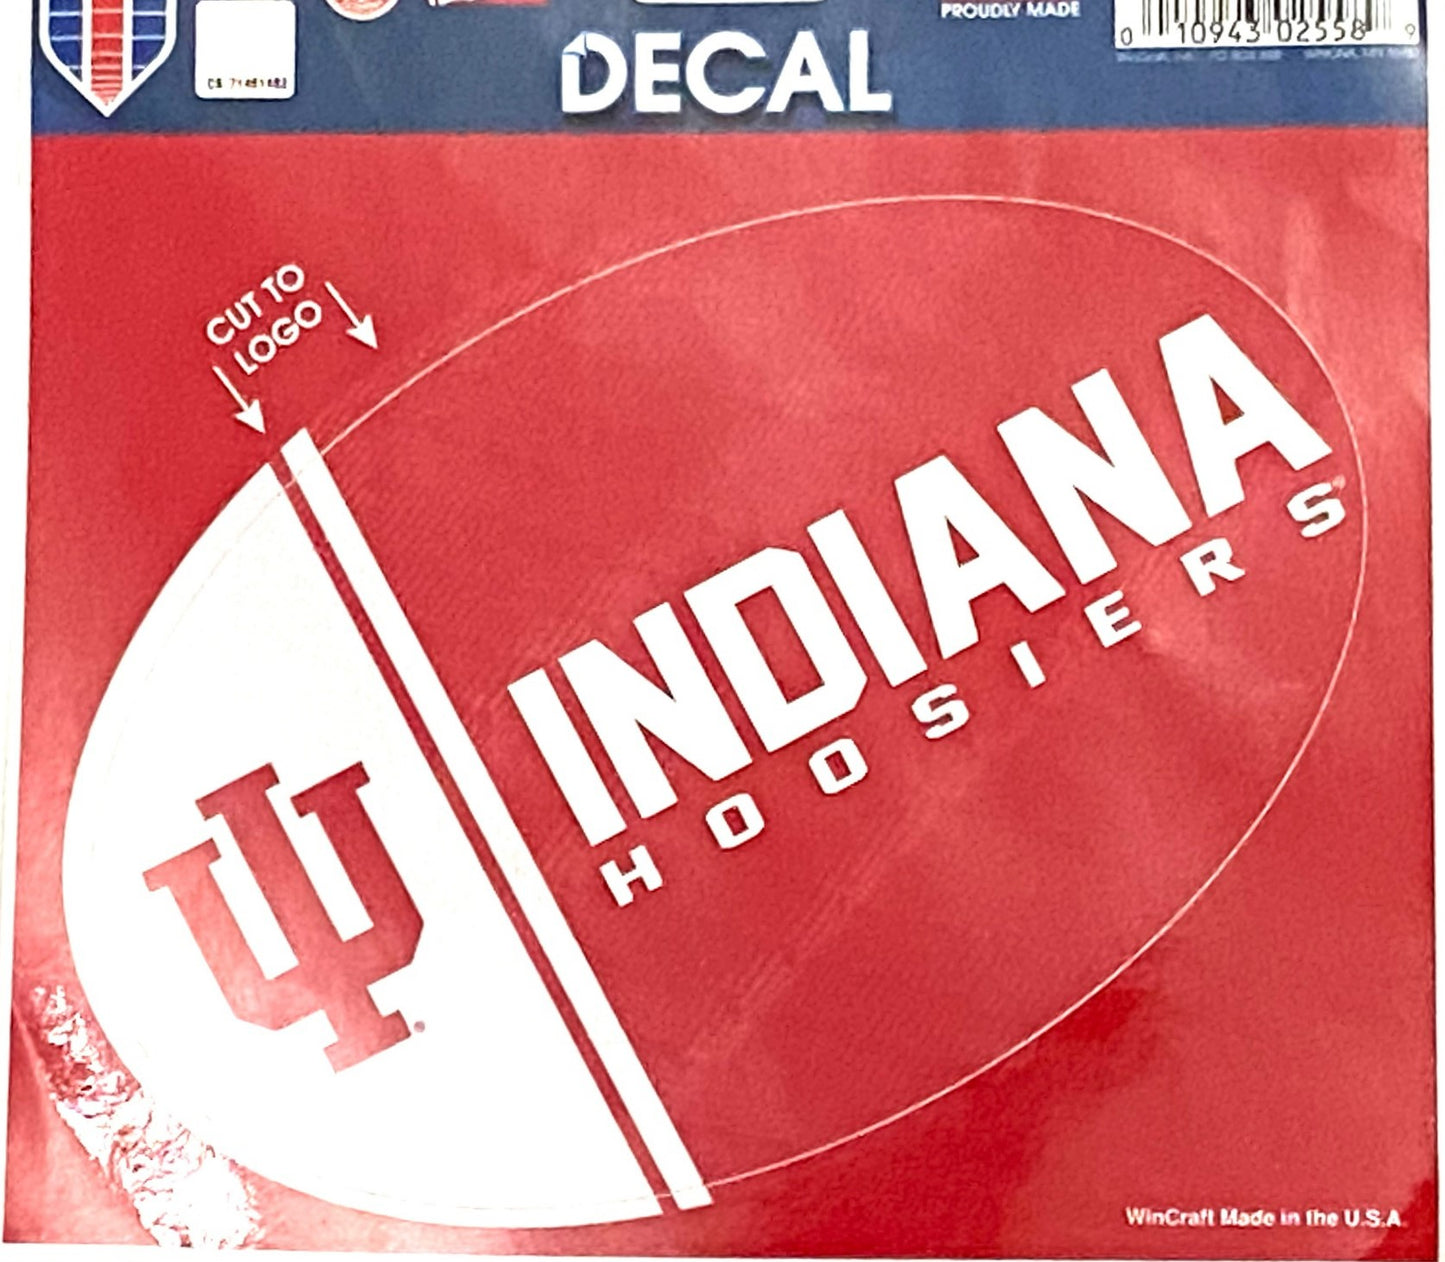 Indiana Hoosiers NCAA Football NOS Decal by Wincraft